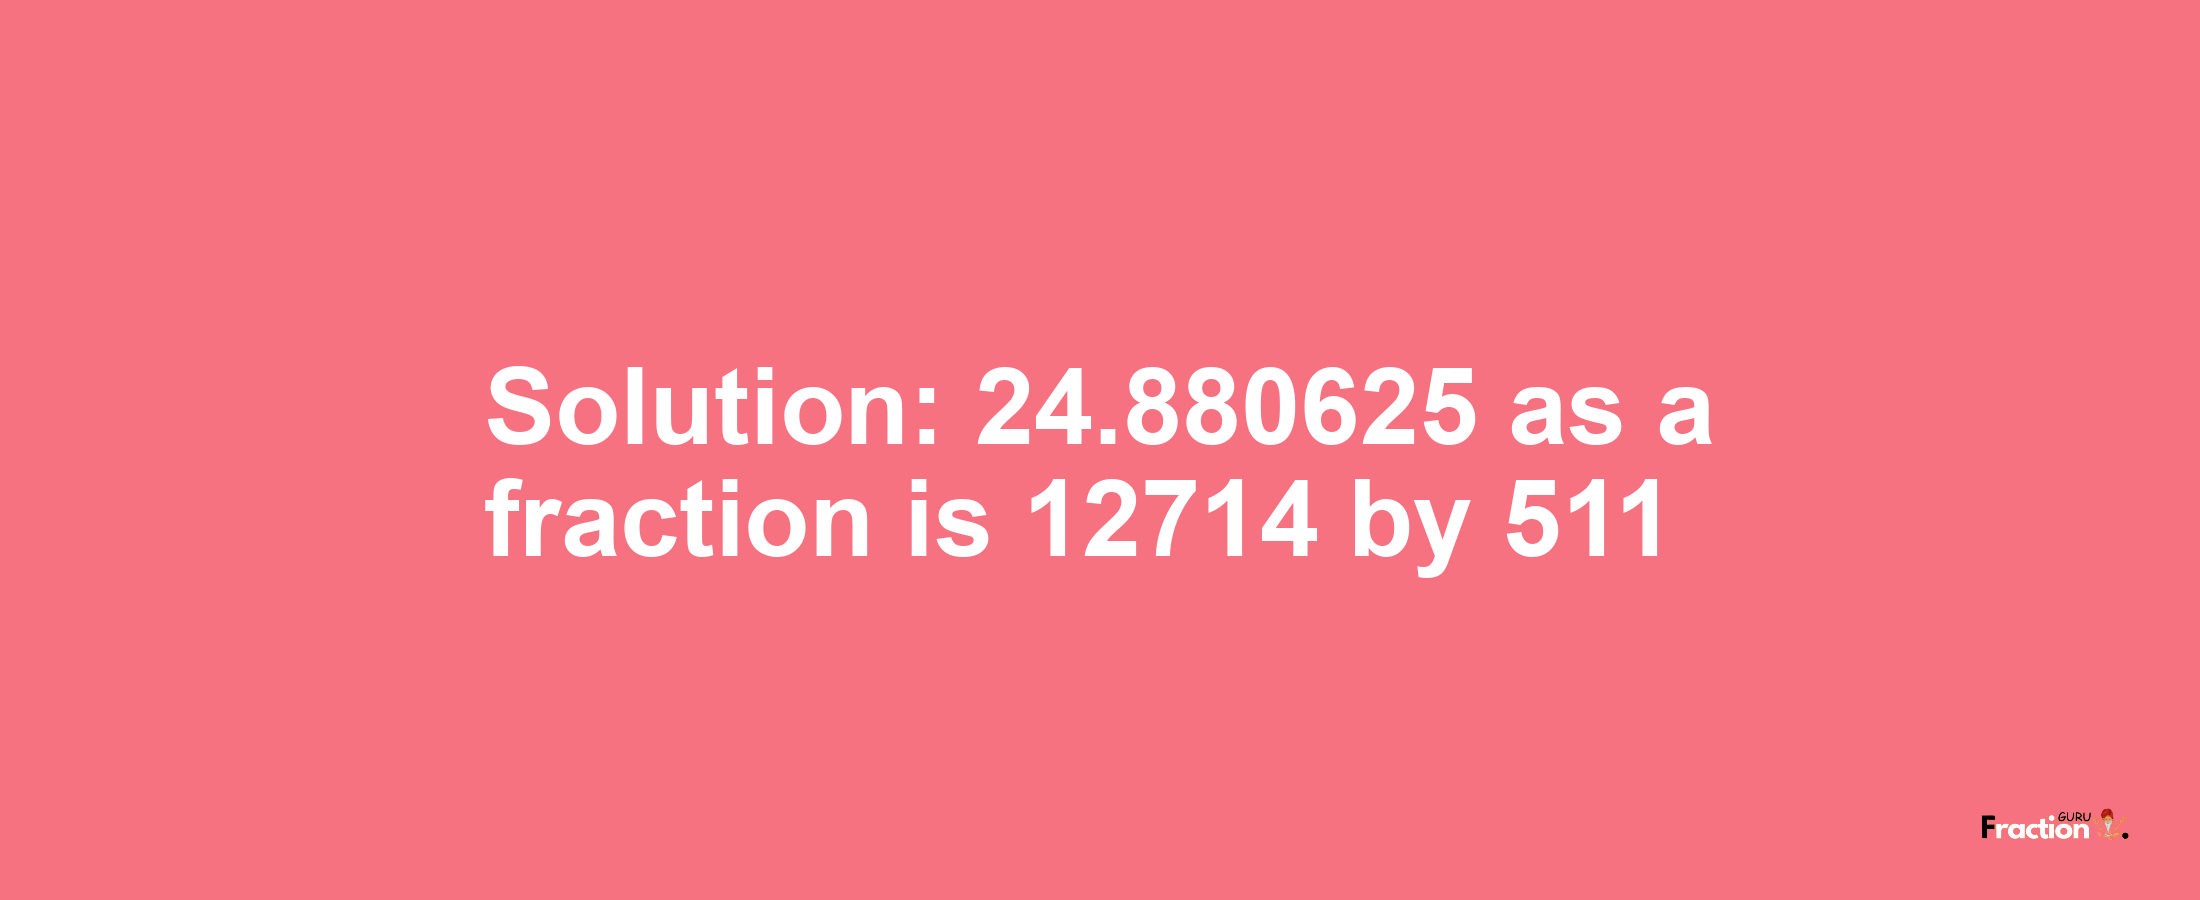 Solution:24.880625 as a fraction is 12714/511